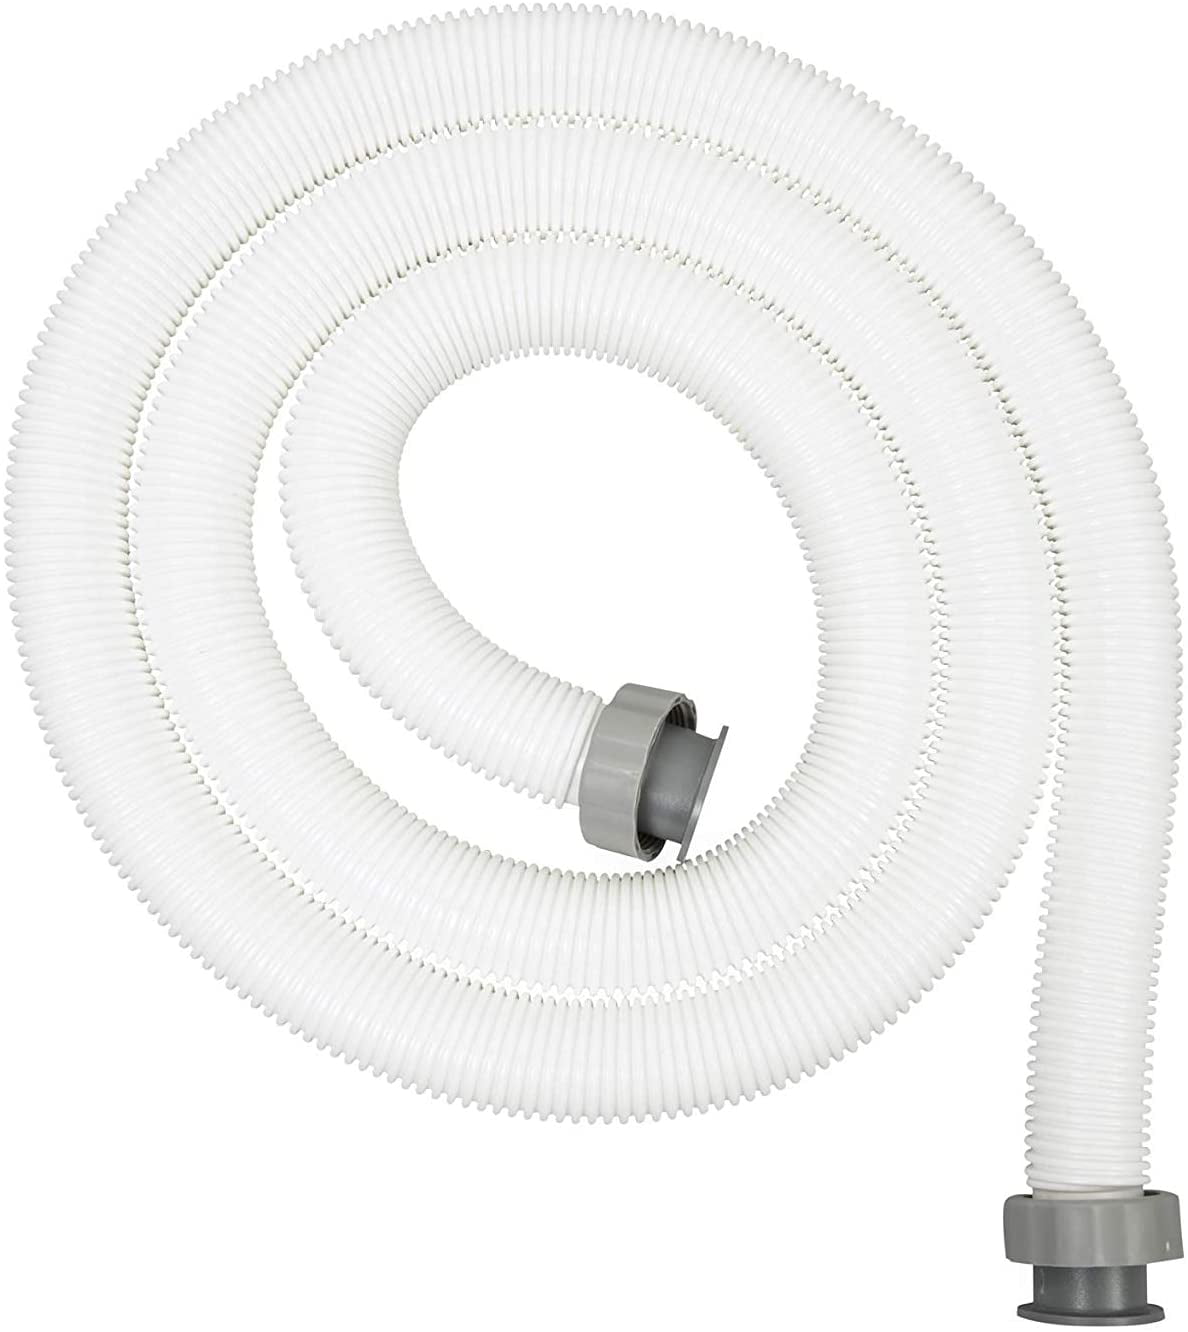 Swimming Pool Pump Hose 1.25,32mm Diameter Lenght 59in Pool Hose with Material Belt Replacement Hose Compatible with Filter Pump 300/ 330 /530 /1000 GPH 1PC-59in